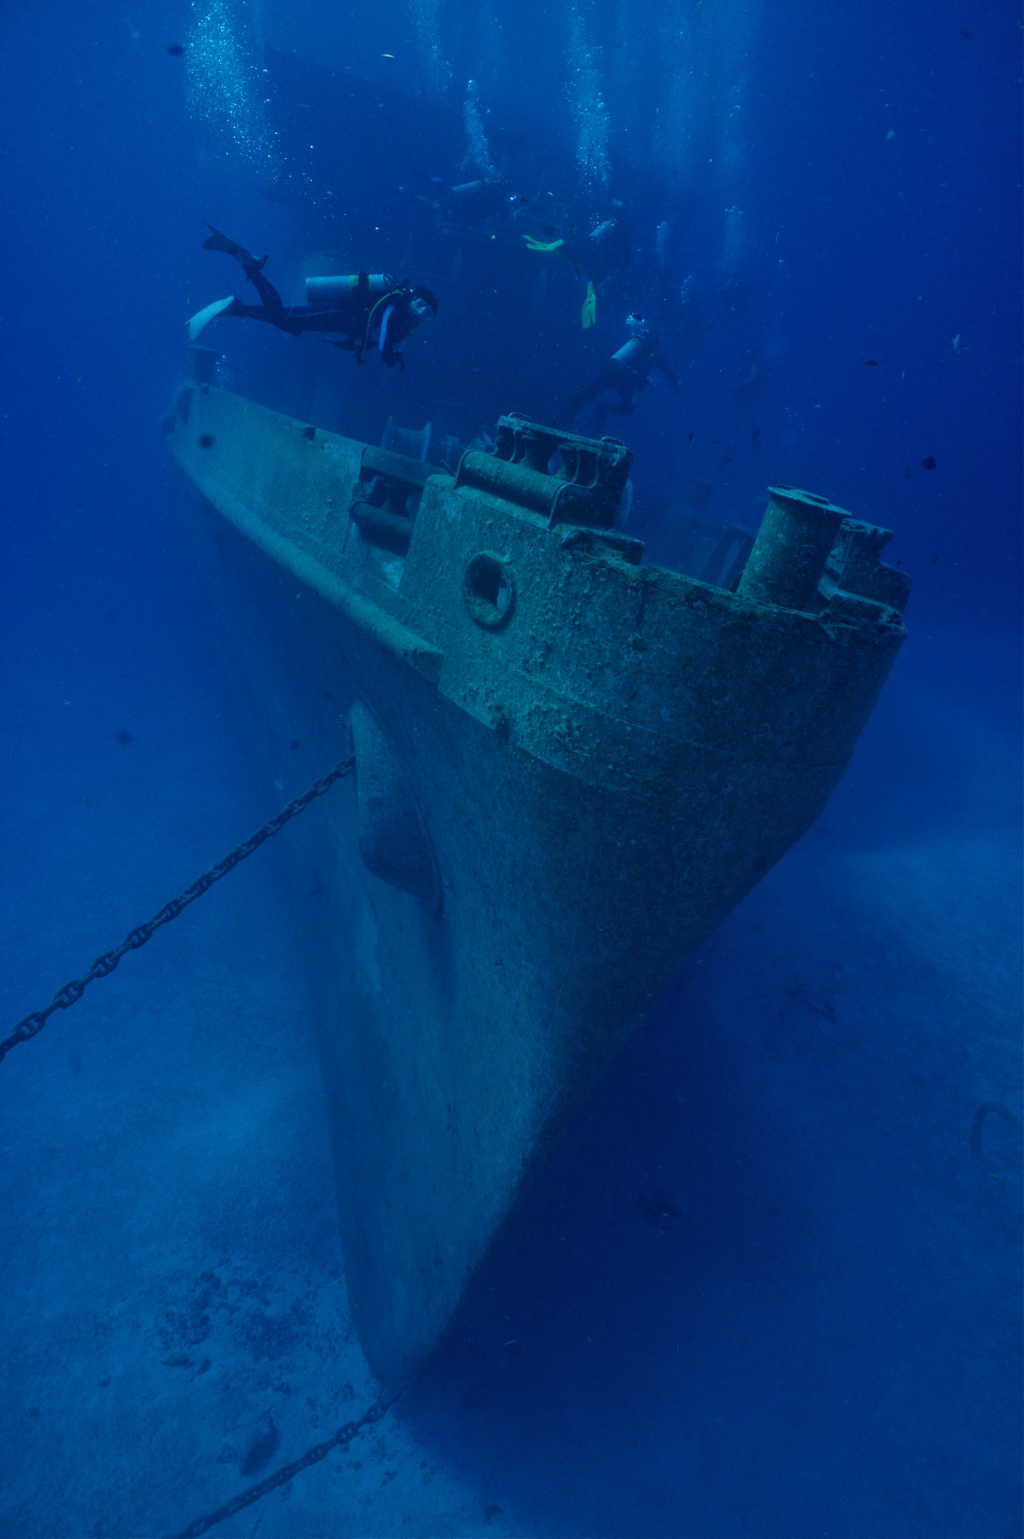 Cayman's Kittiwake shipwreck rolled over by Tropical Storm Nate